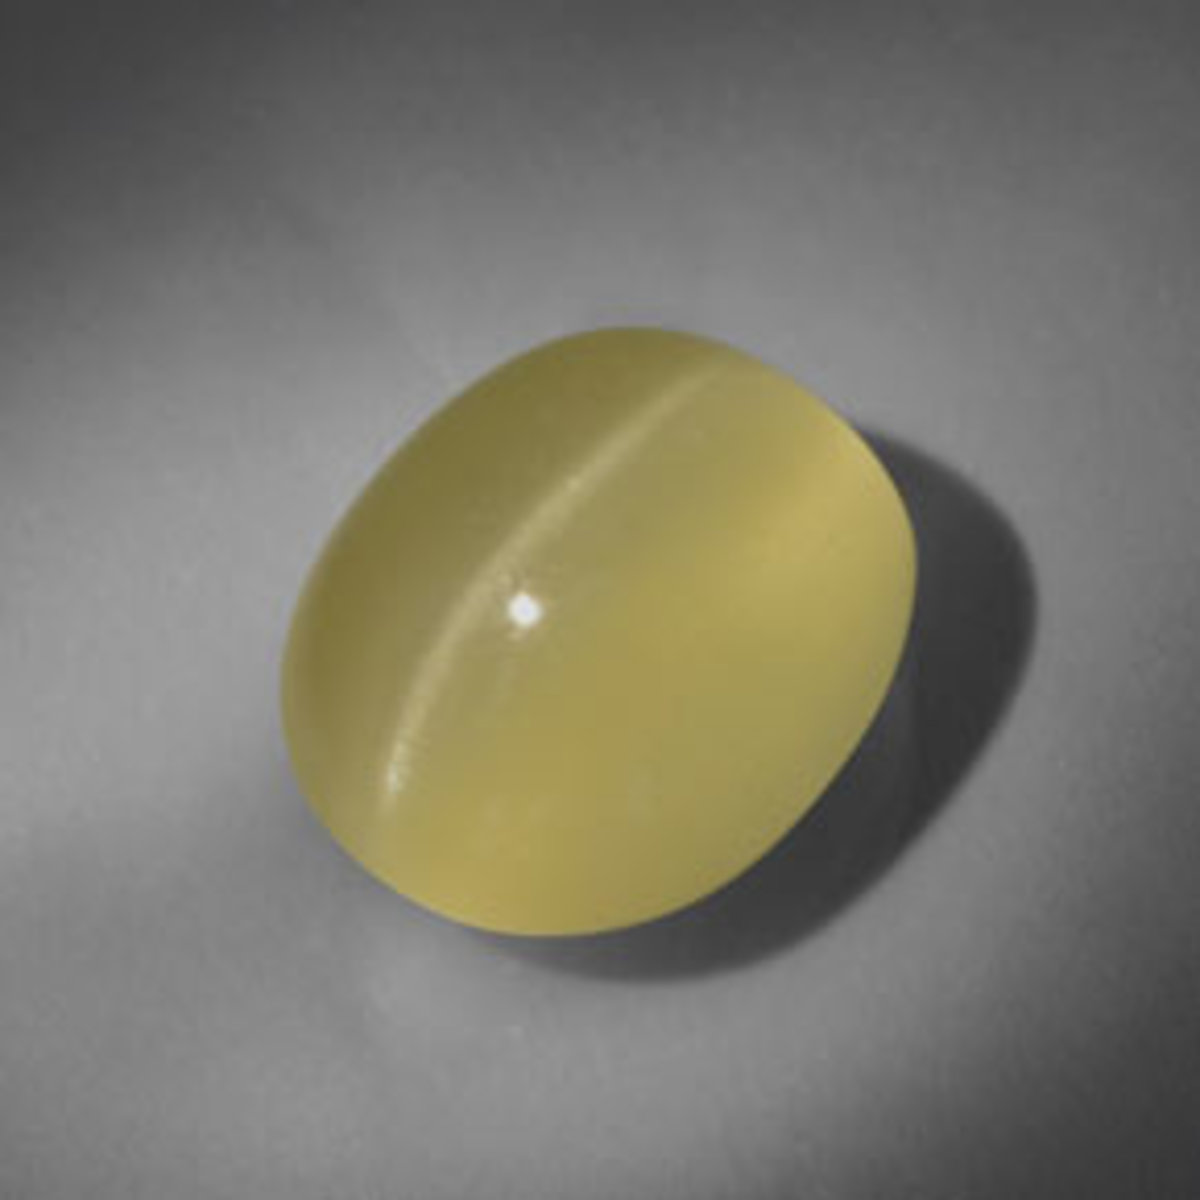 Cat's Eye, another form of Chrysoberyl, has been known throughout history to be a good luck charm because of the unique positive attributes of this stone.